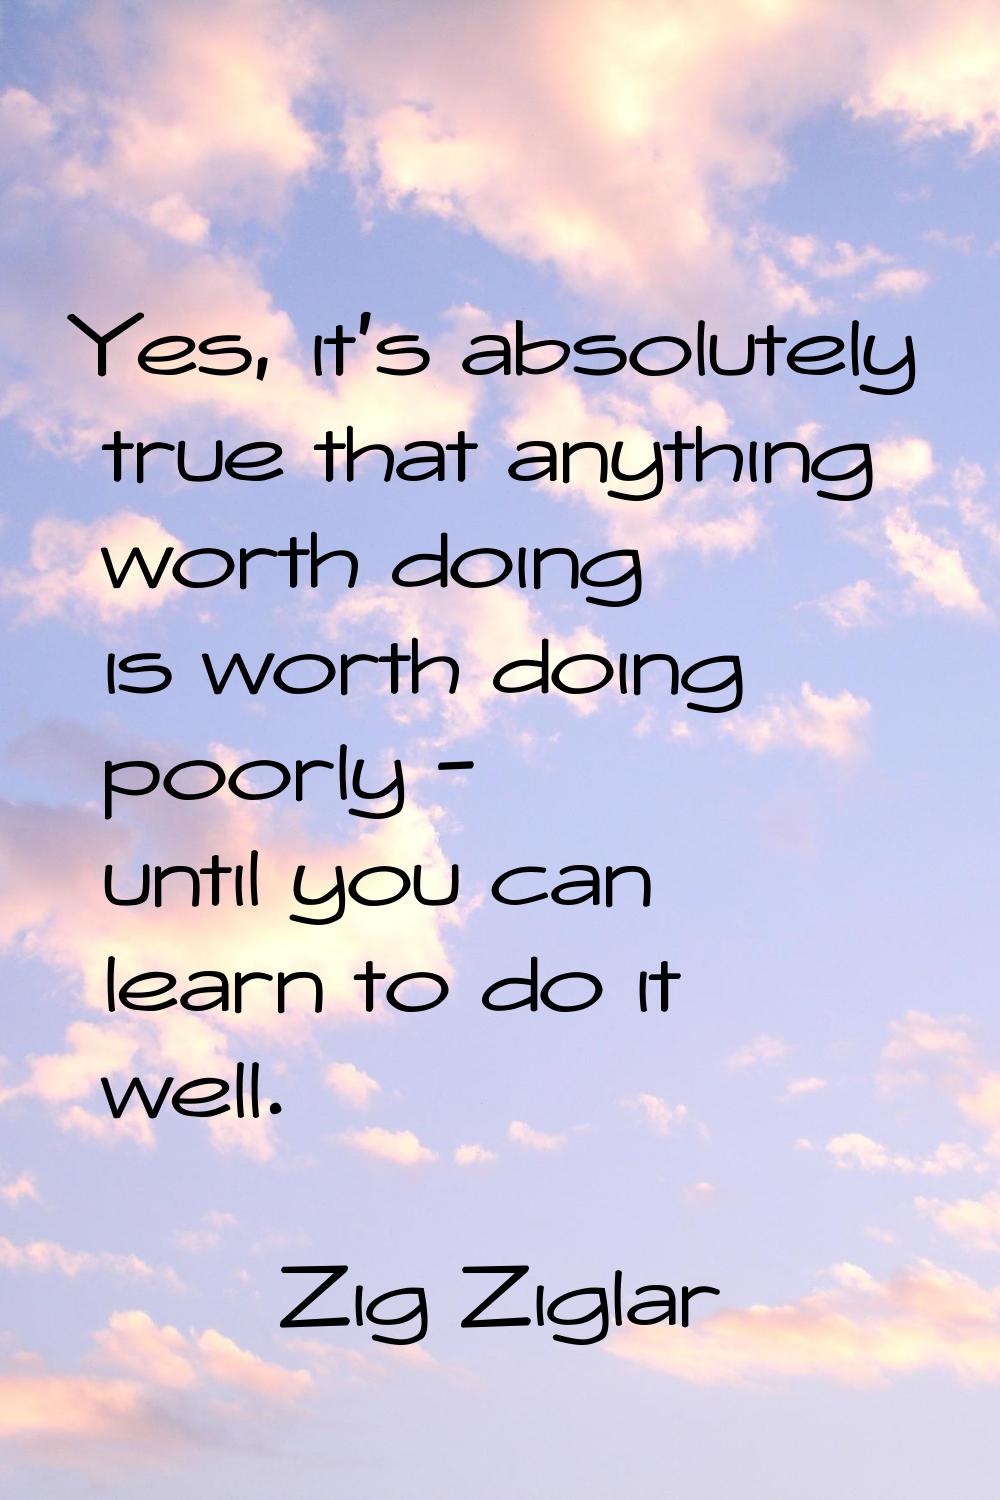 Yes, it's absolutely true that anything worth doing is worth doing poorly - until you can learn to 